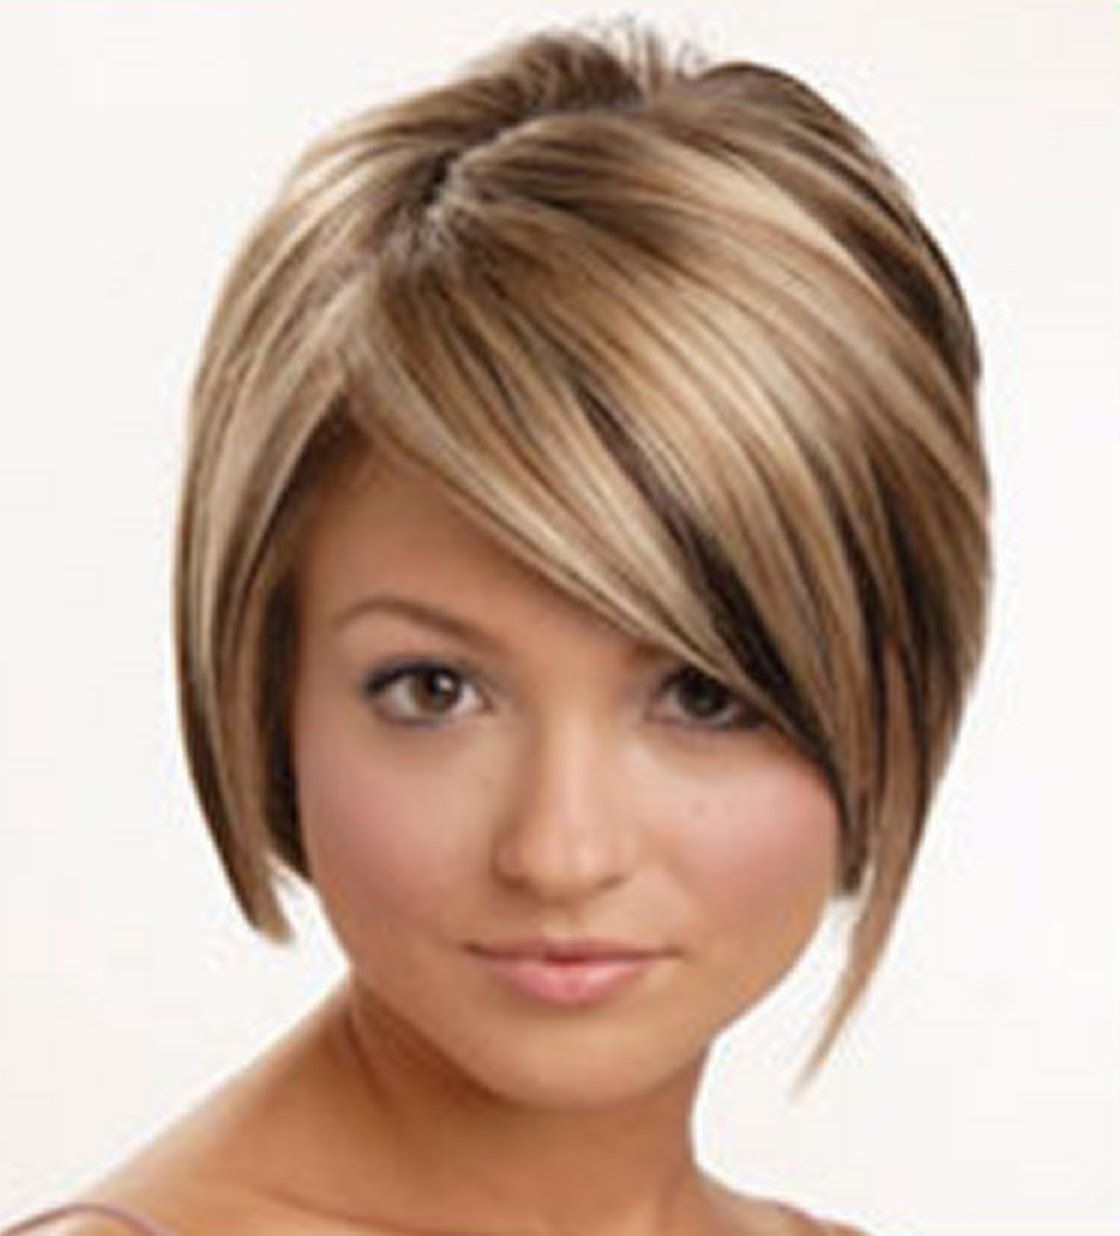 Layered Bob Hairstyles For Chic And Beautiful Looks! – The Haircut Web For Young Girl Short Hairstyles (View 21 of 25)